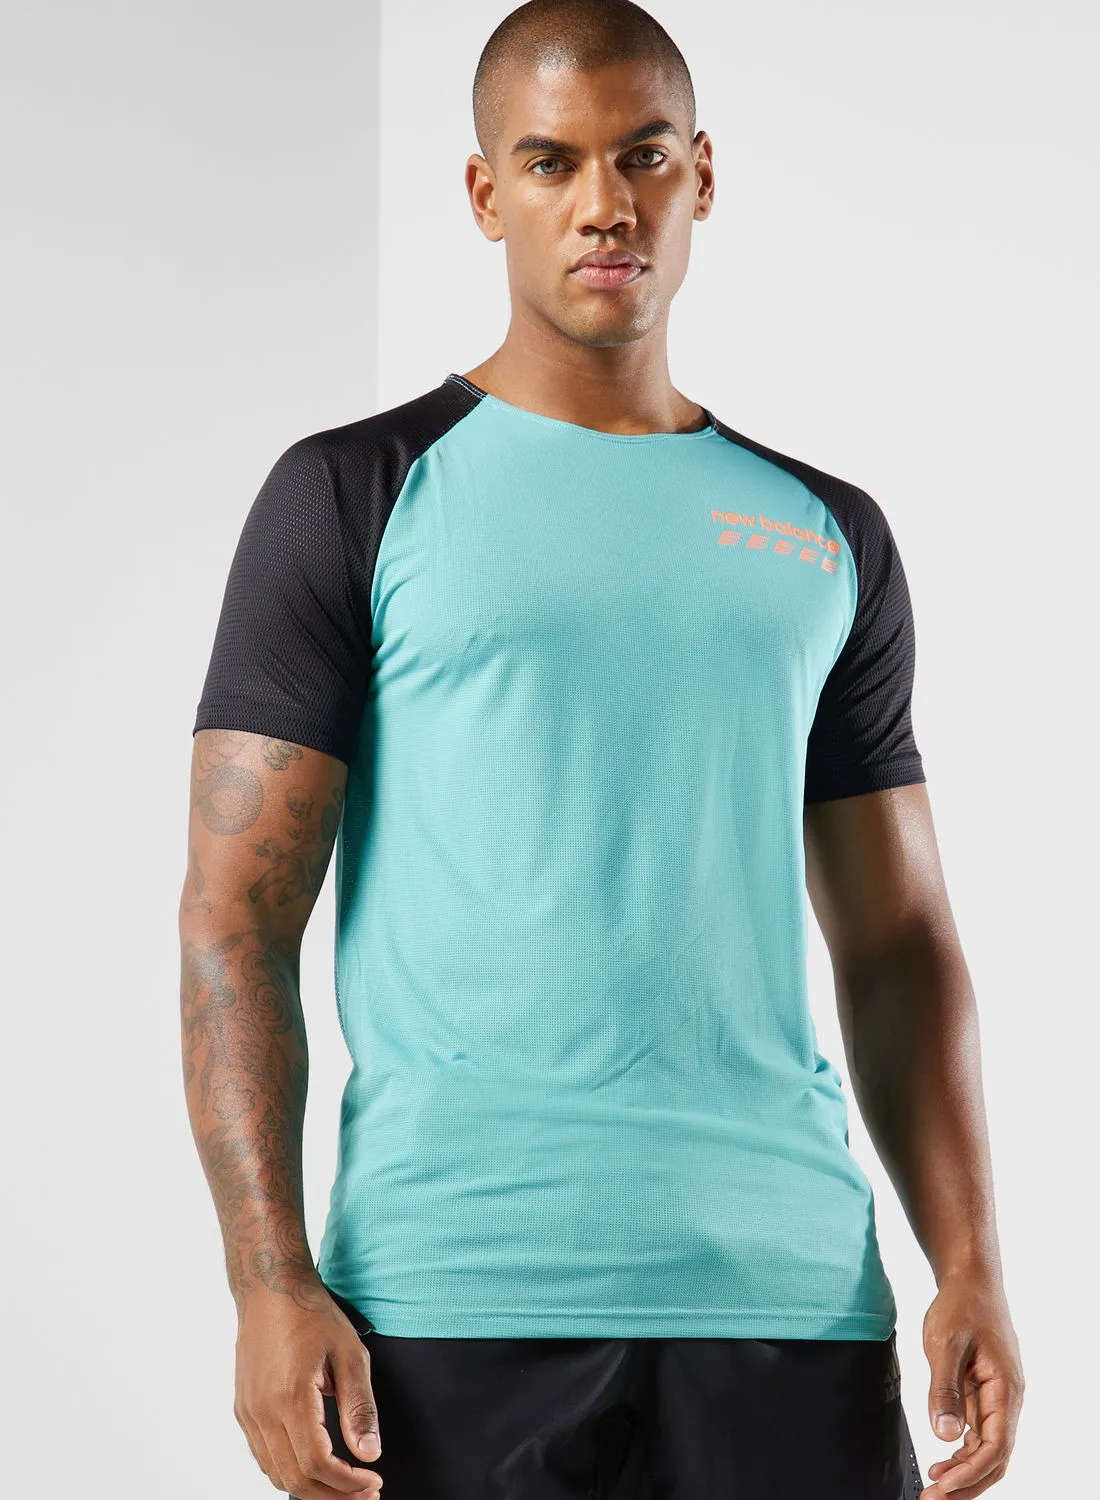 New Balance Accelerate Pacer Printed T-Shirt